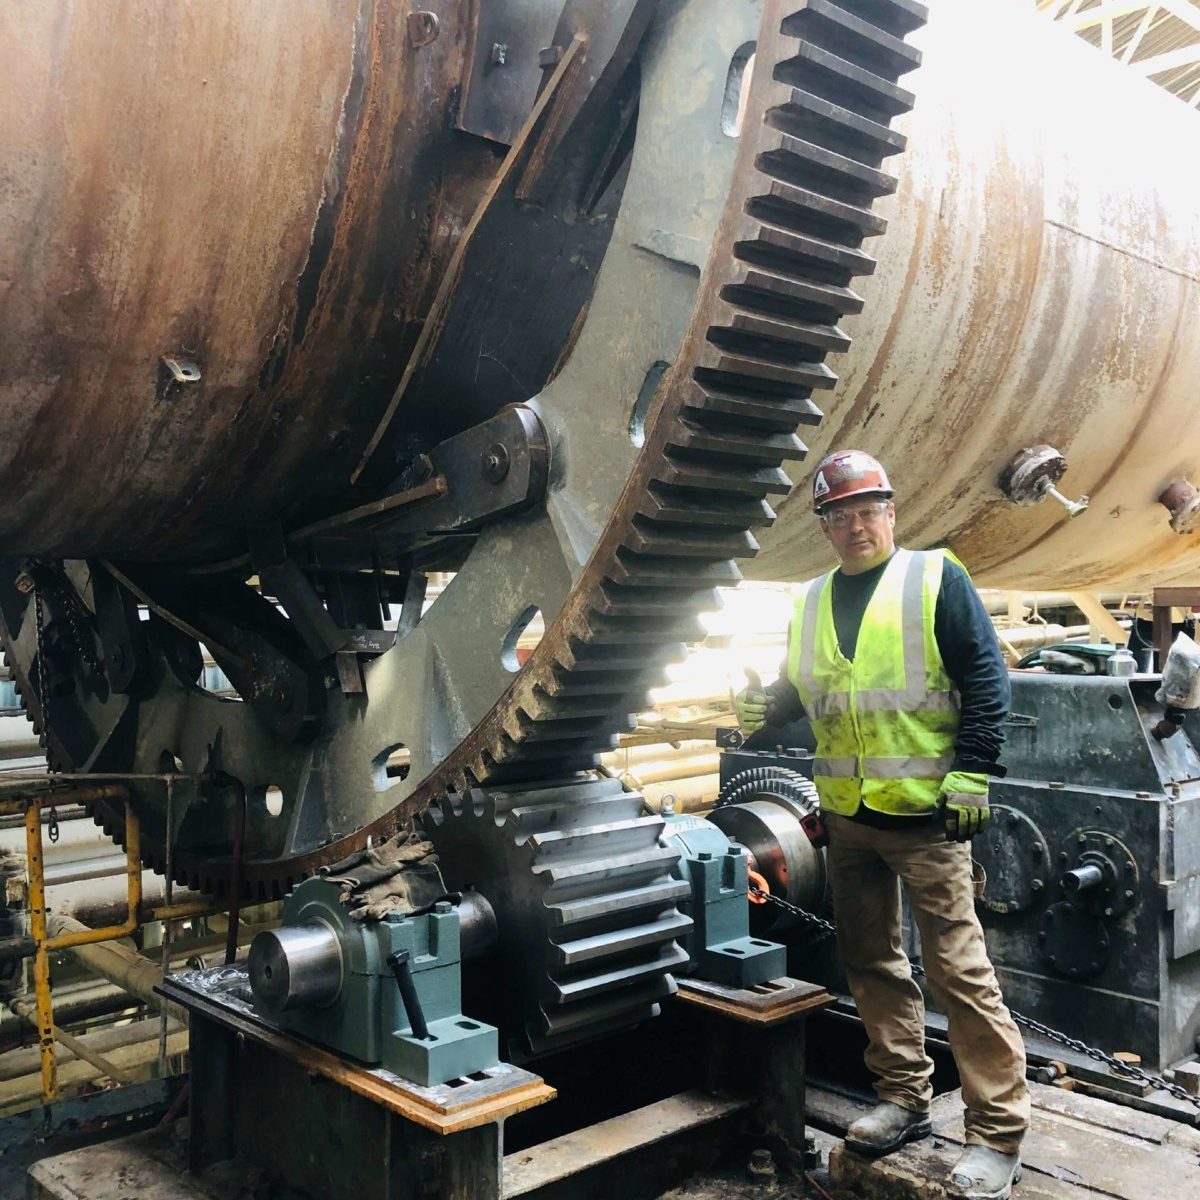 Complete-new-ring-gear-pinion-and-drive-base-install-at-paper-mill-in-Maine-scaled